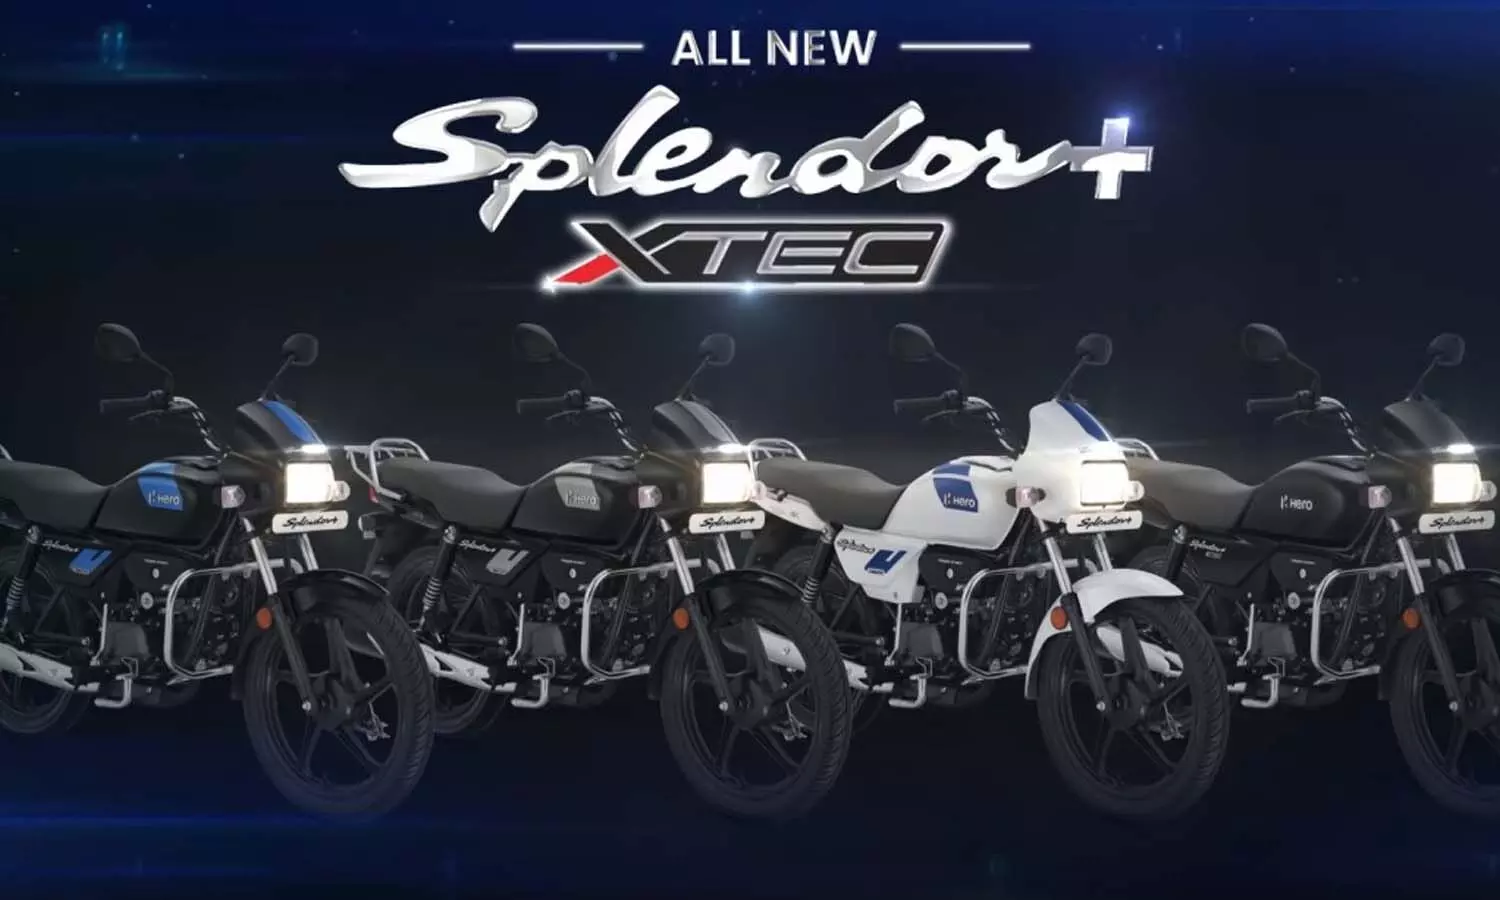 Hero launches Splendor Xtec with advanced features, know about its price, features and mileage here